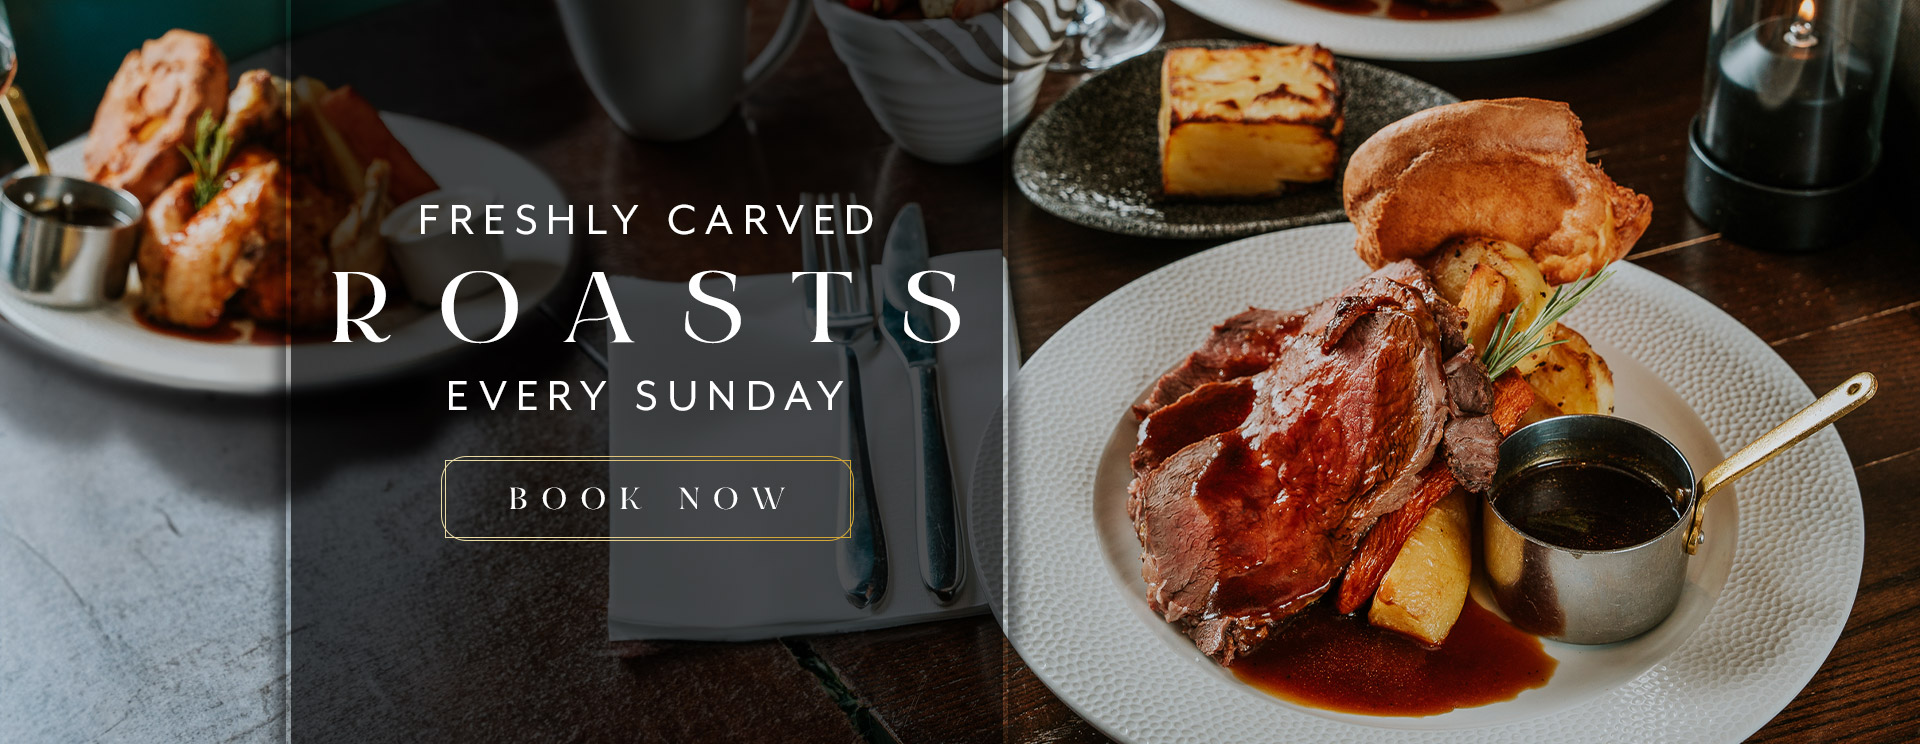 Sunday Lunch at The Tudor Rose